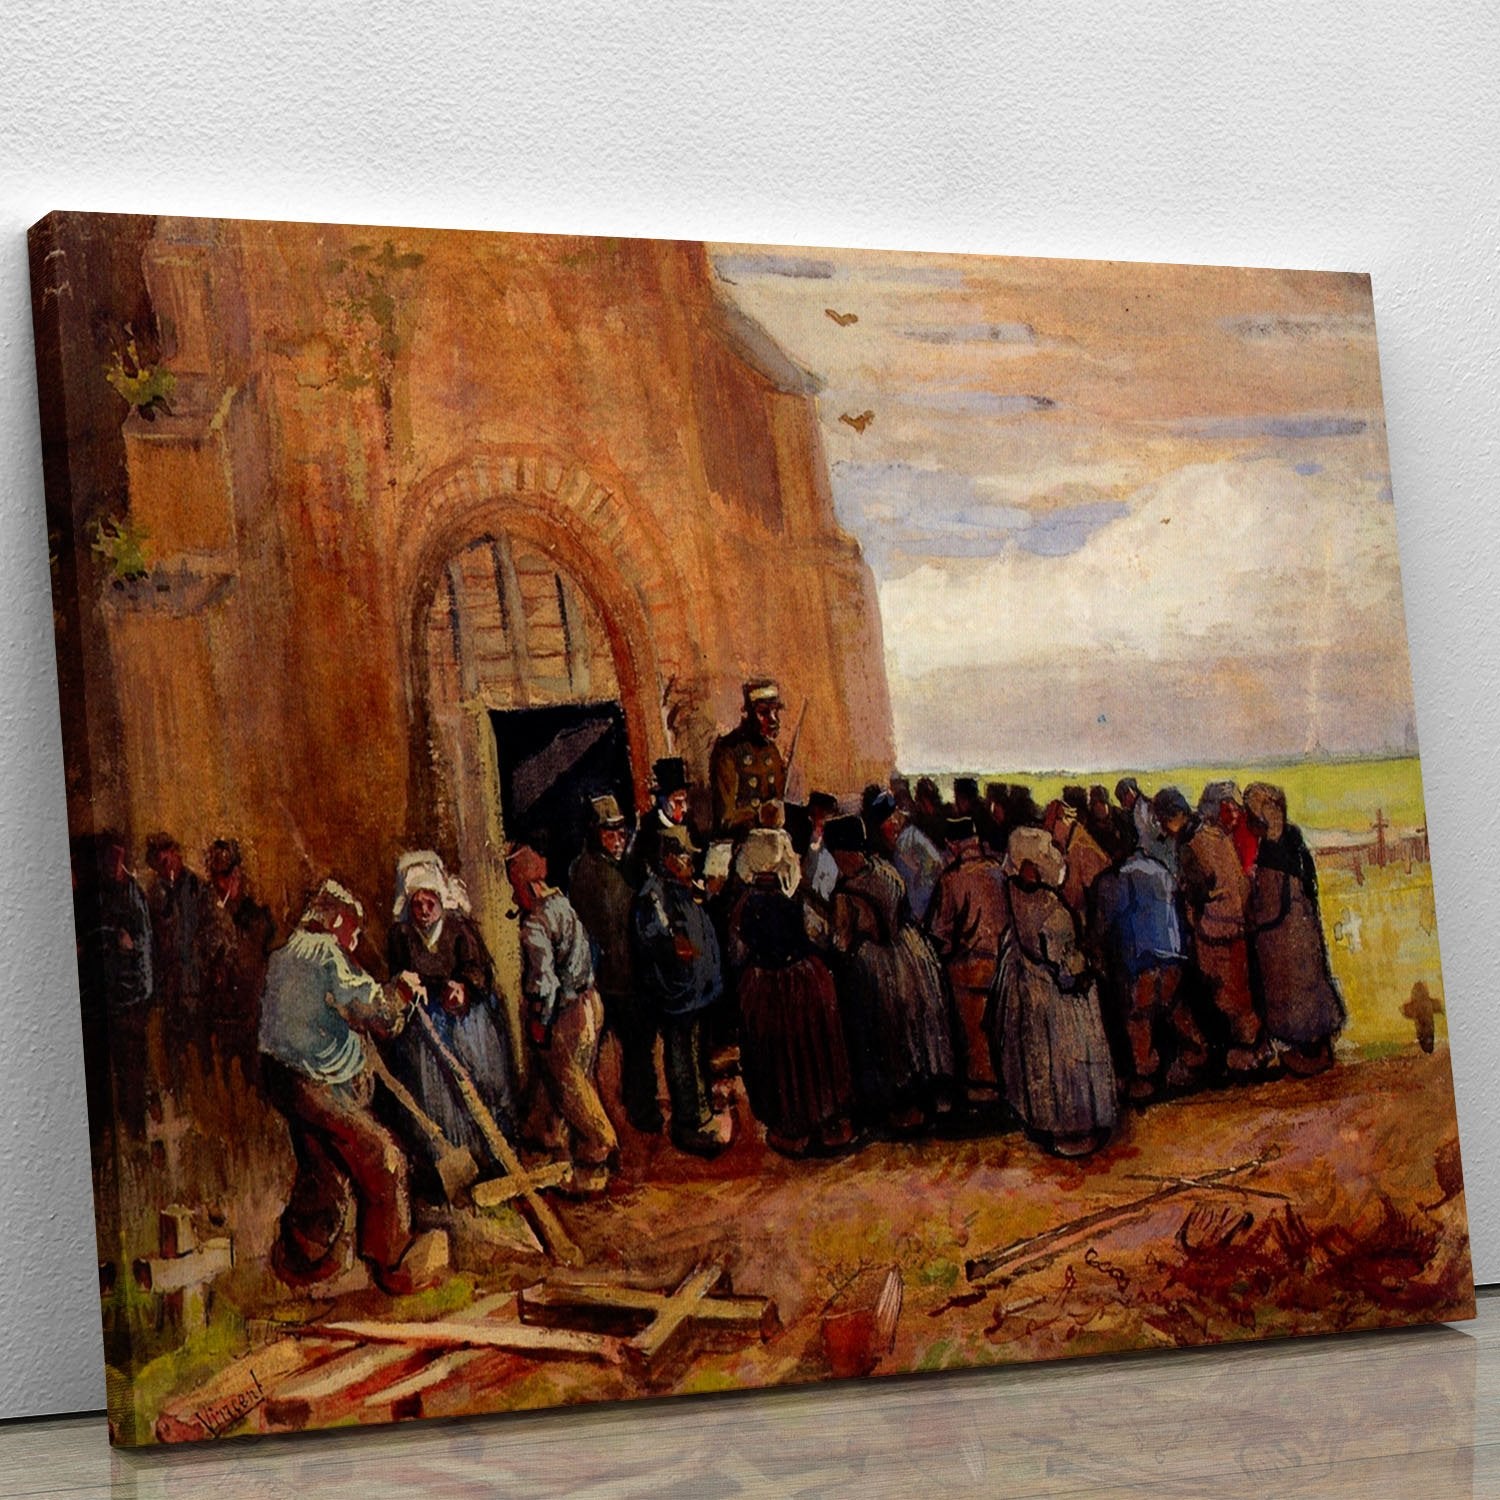 Sale of Building Scrap by Van Gogh Canvas Print or Poster